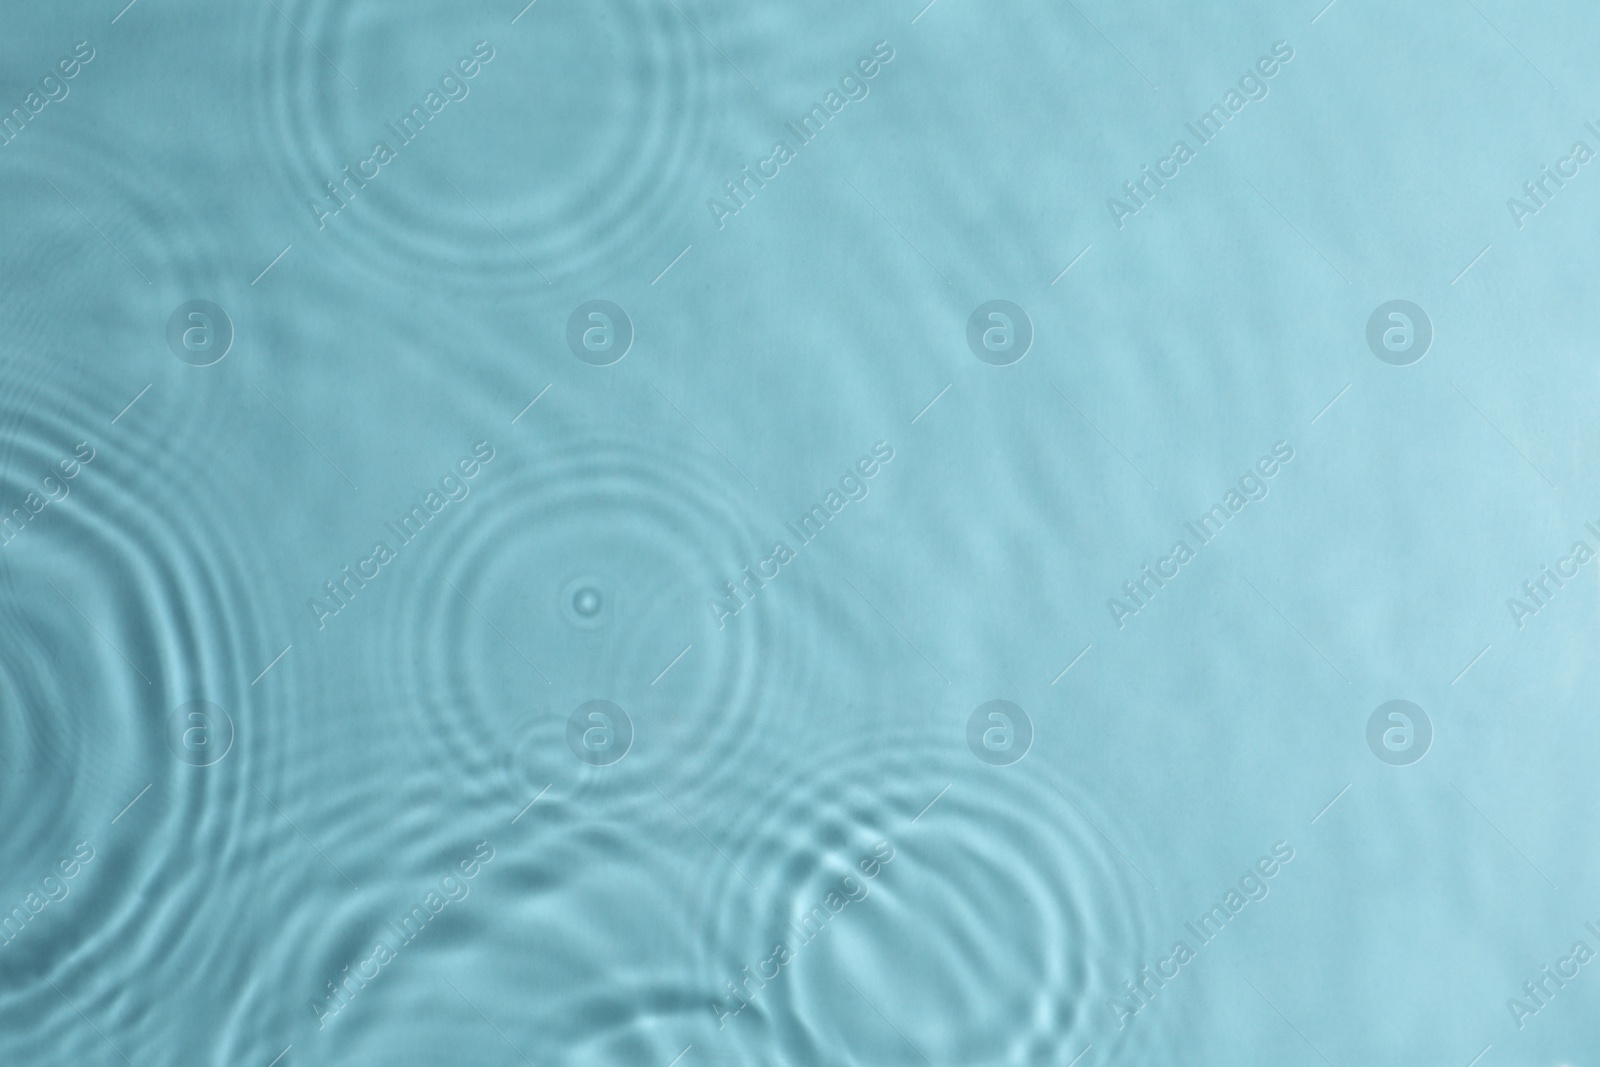 Photo of Closeup view of water with circles on turquoise background. Space for text